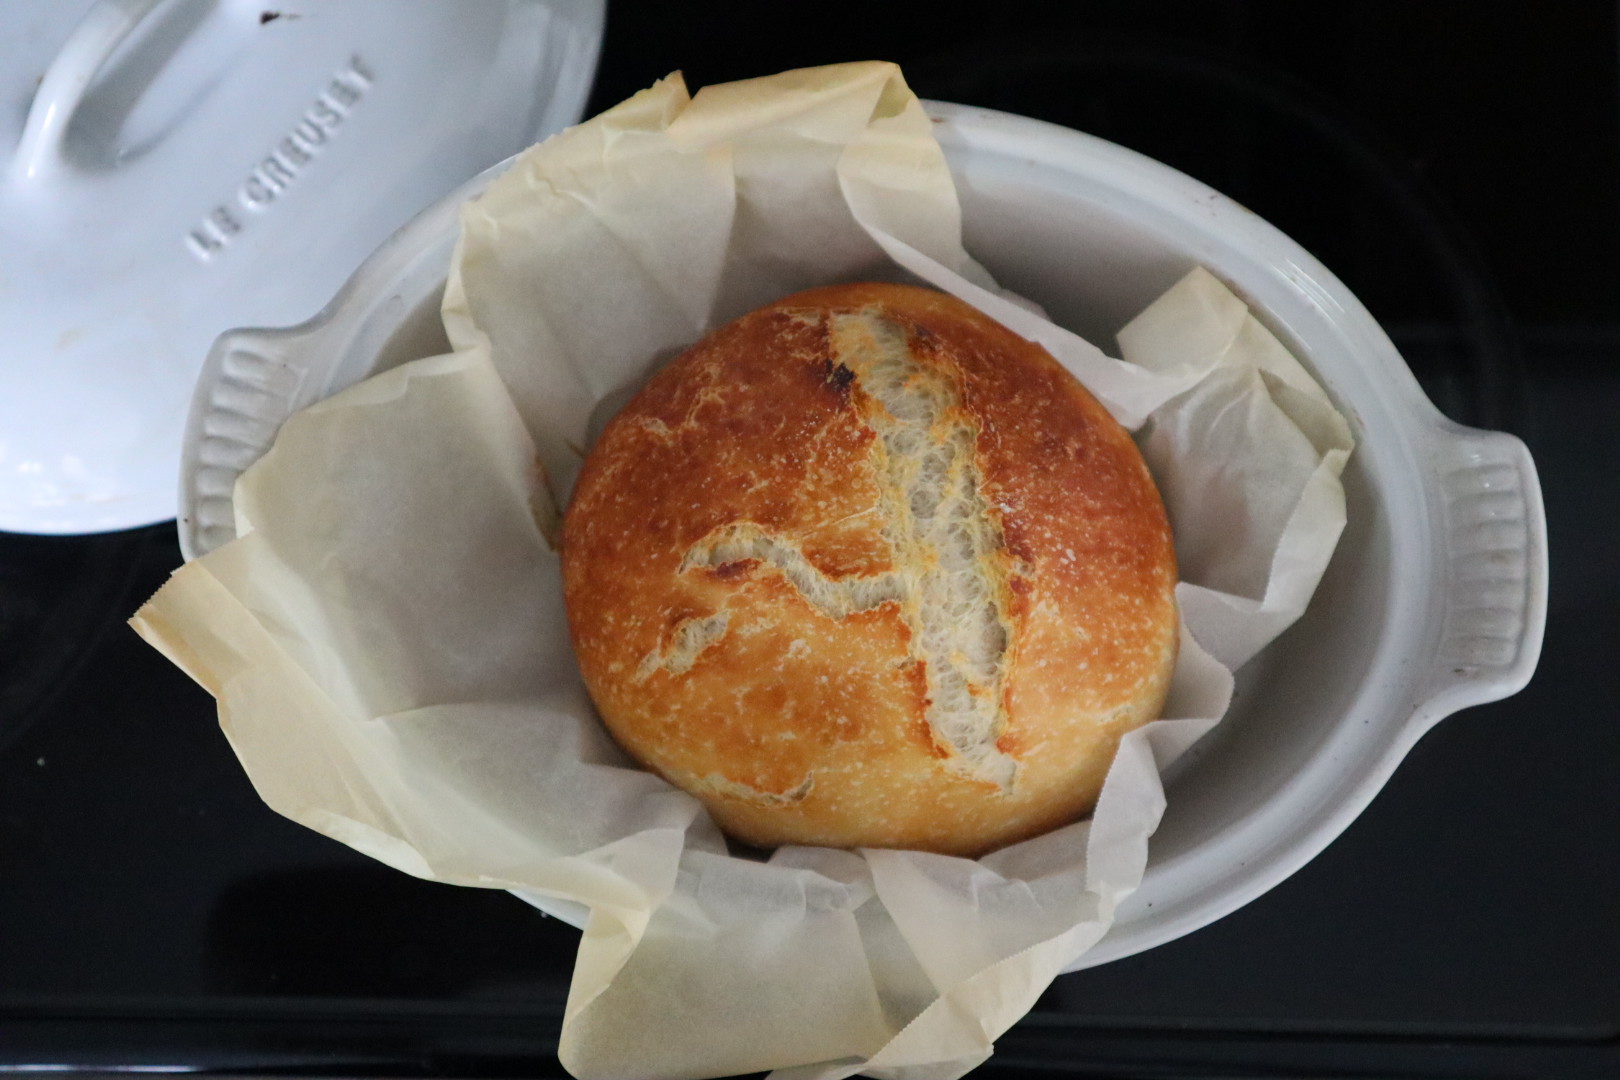 No Knead Dutch Oven Bread (Rosemary Bread) Recipe - The Cookie Rookie®